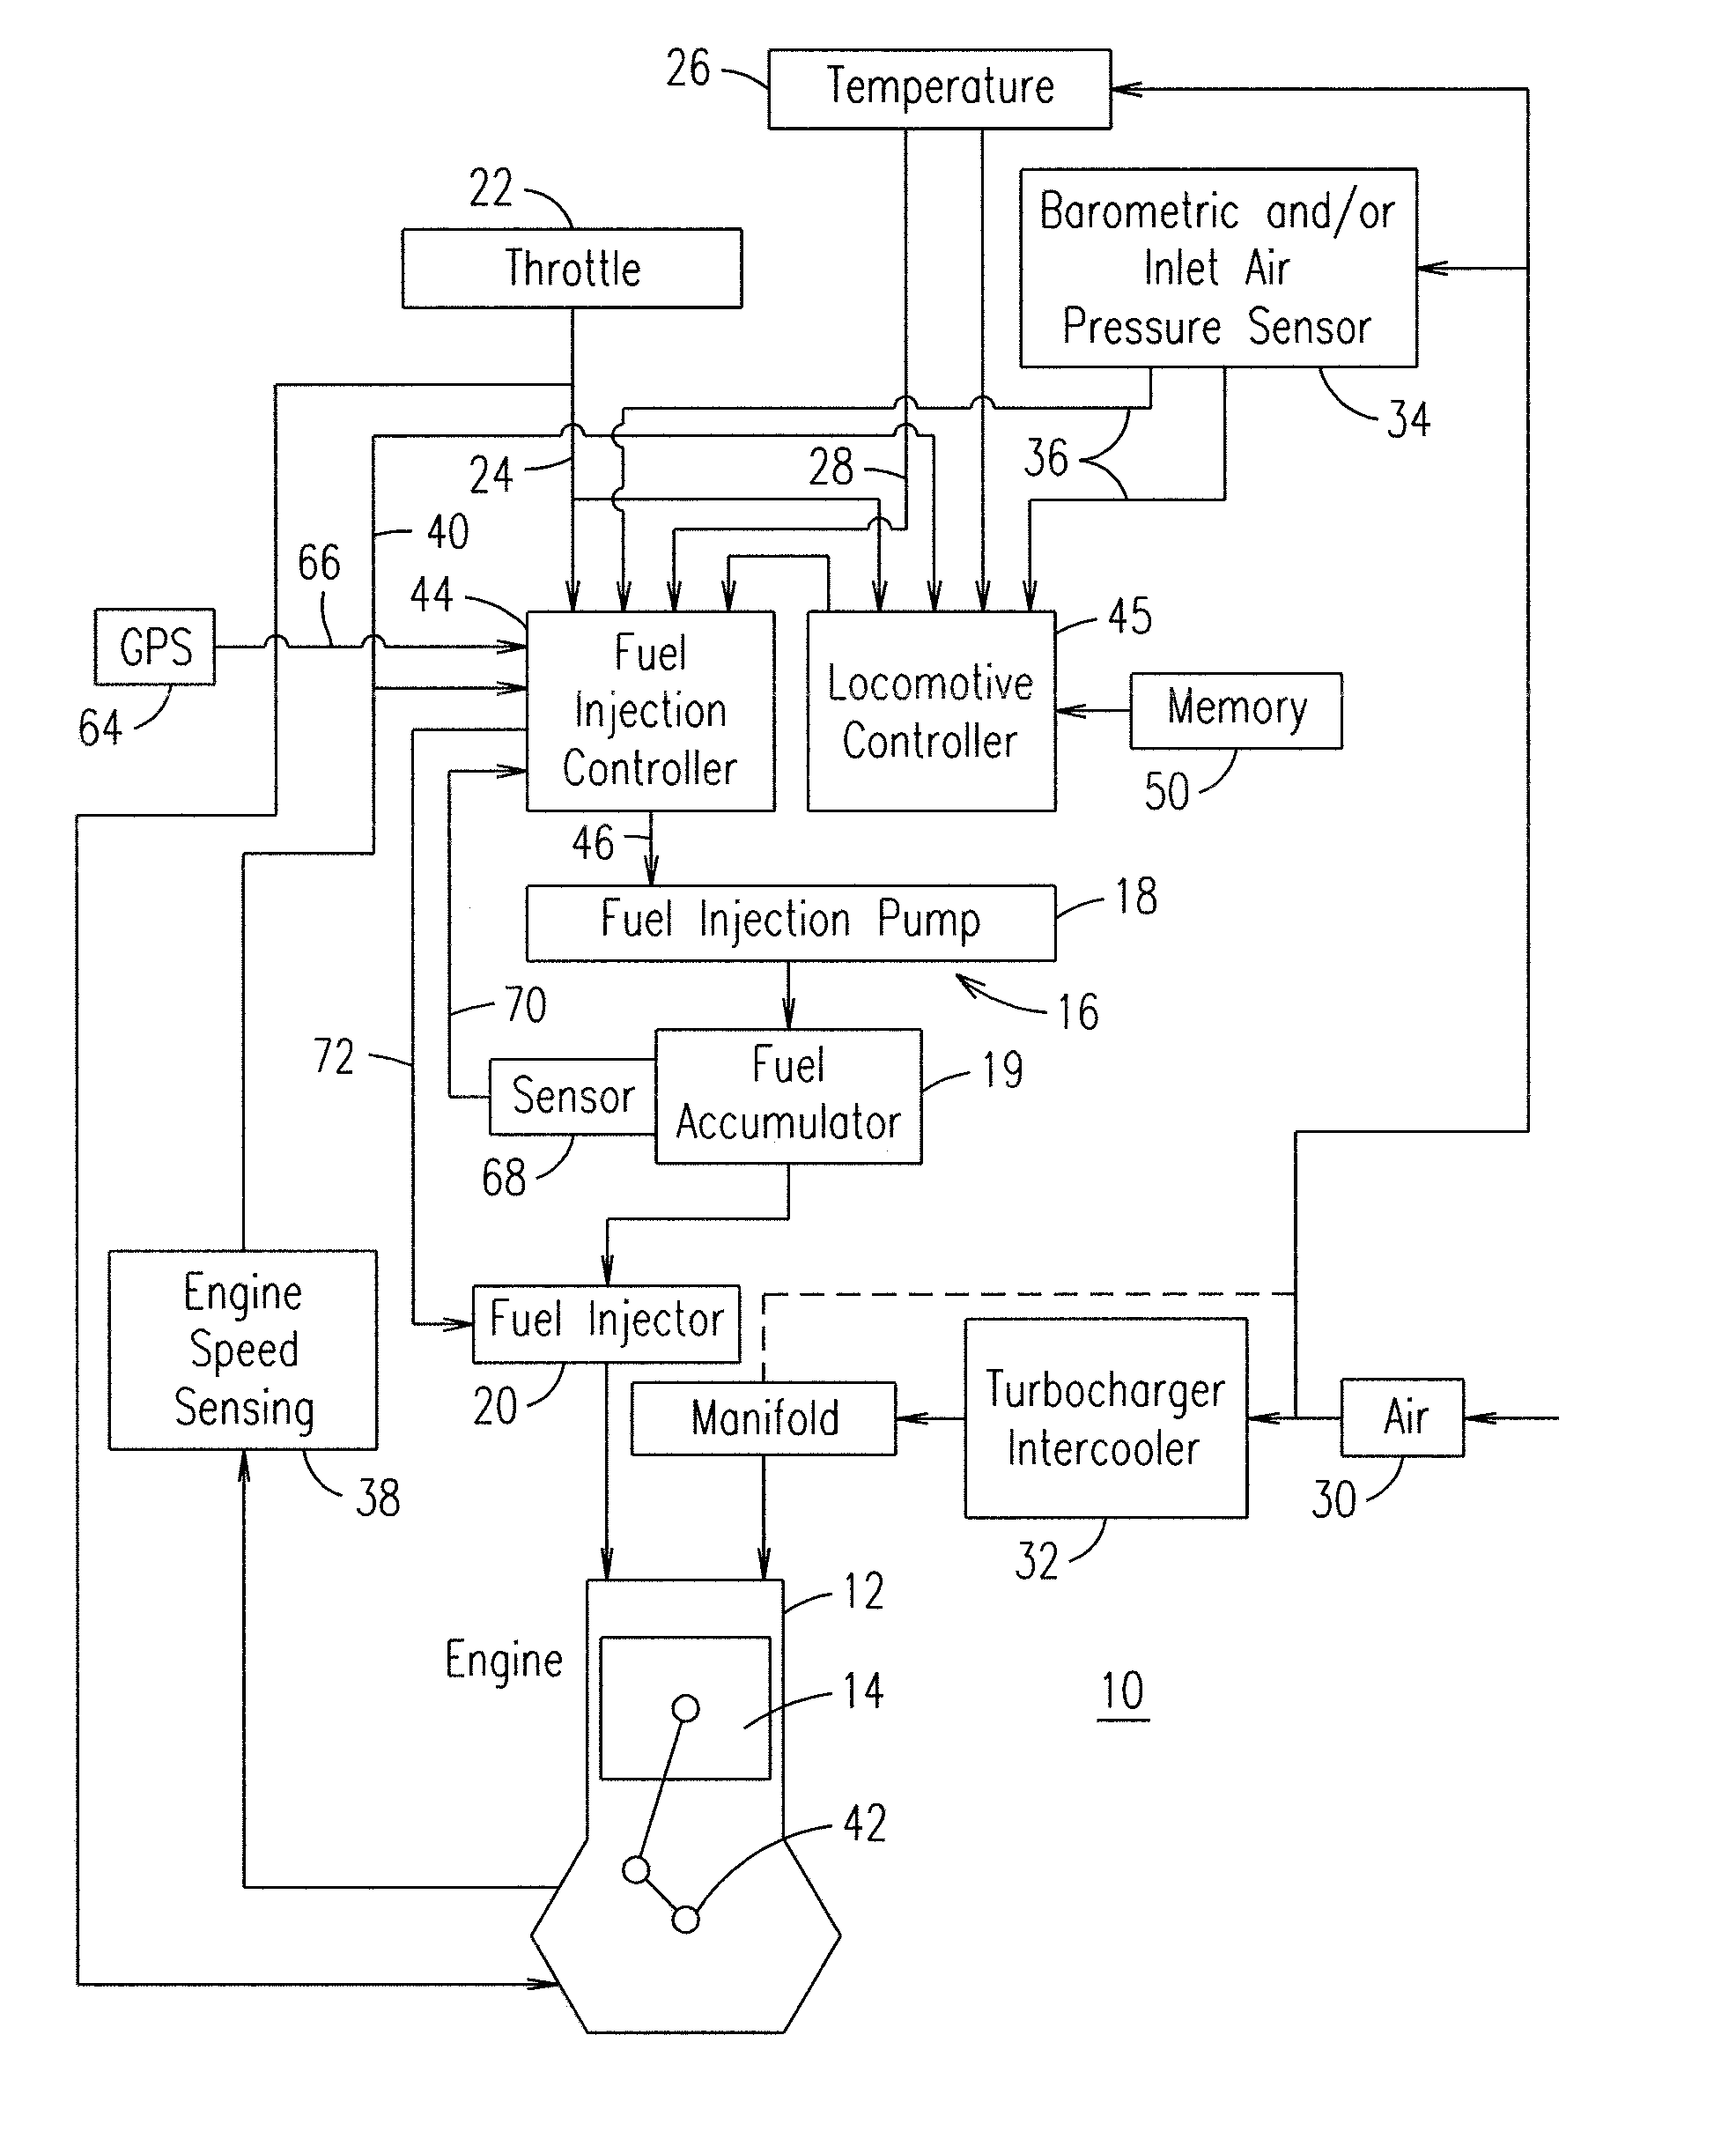 System and Method for Controlling the Fuel Injection Event in an Internal Combustion Engine